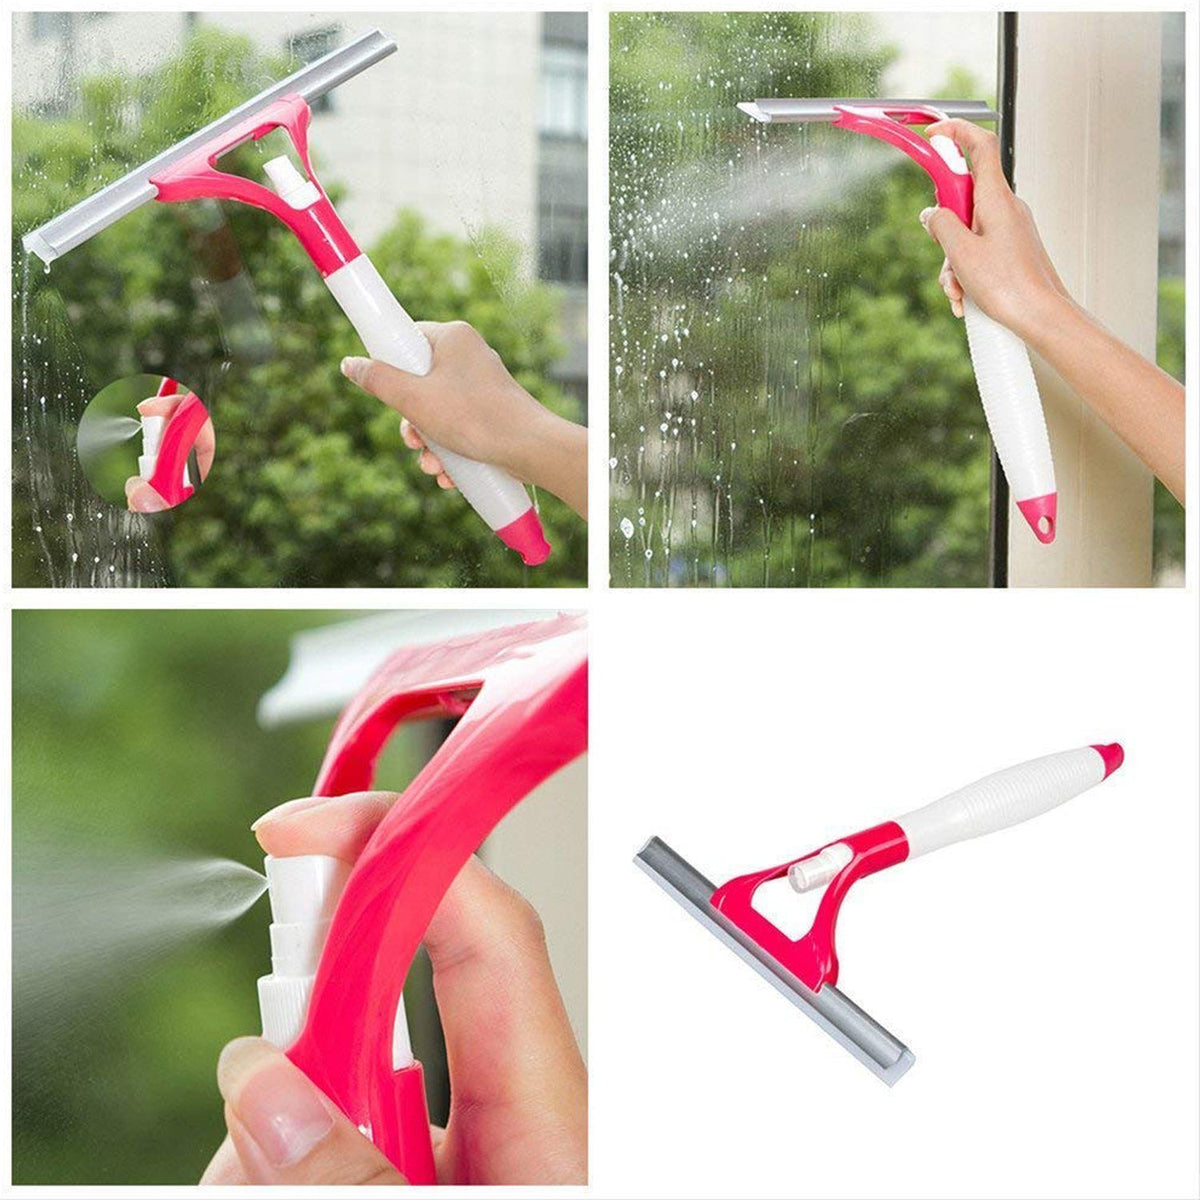 0620 Home Practical Washing brush Magic Spray type cleaning brush with Spray Bottle, glass wiper window clean shave glass sponge car window cleaning (1 Pc)